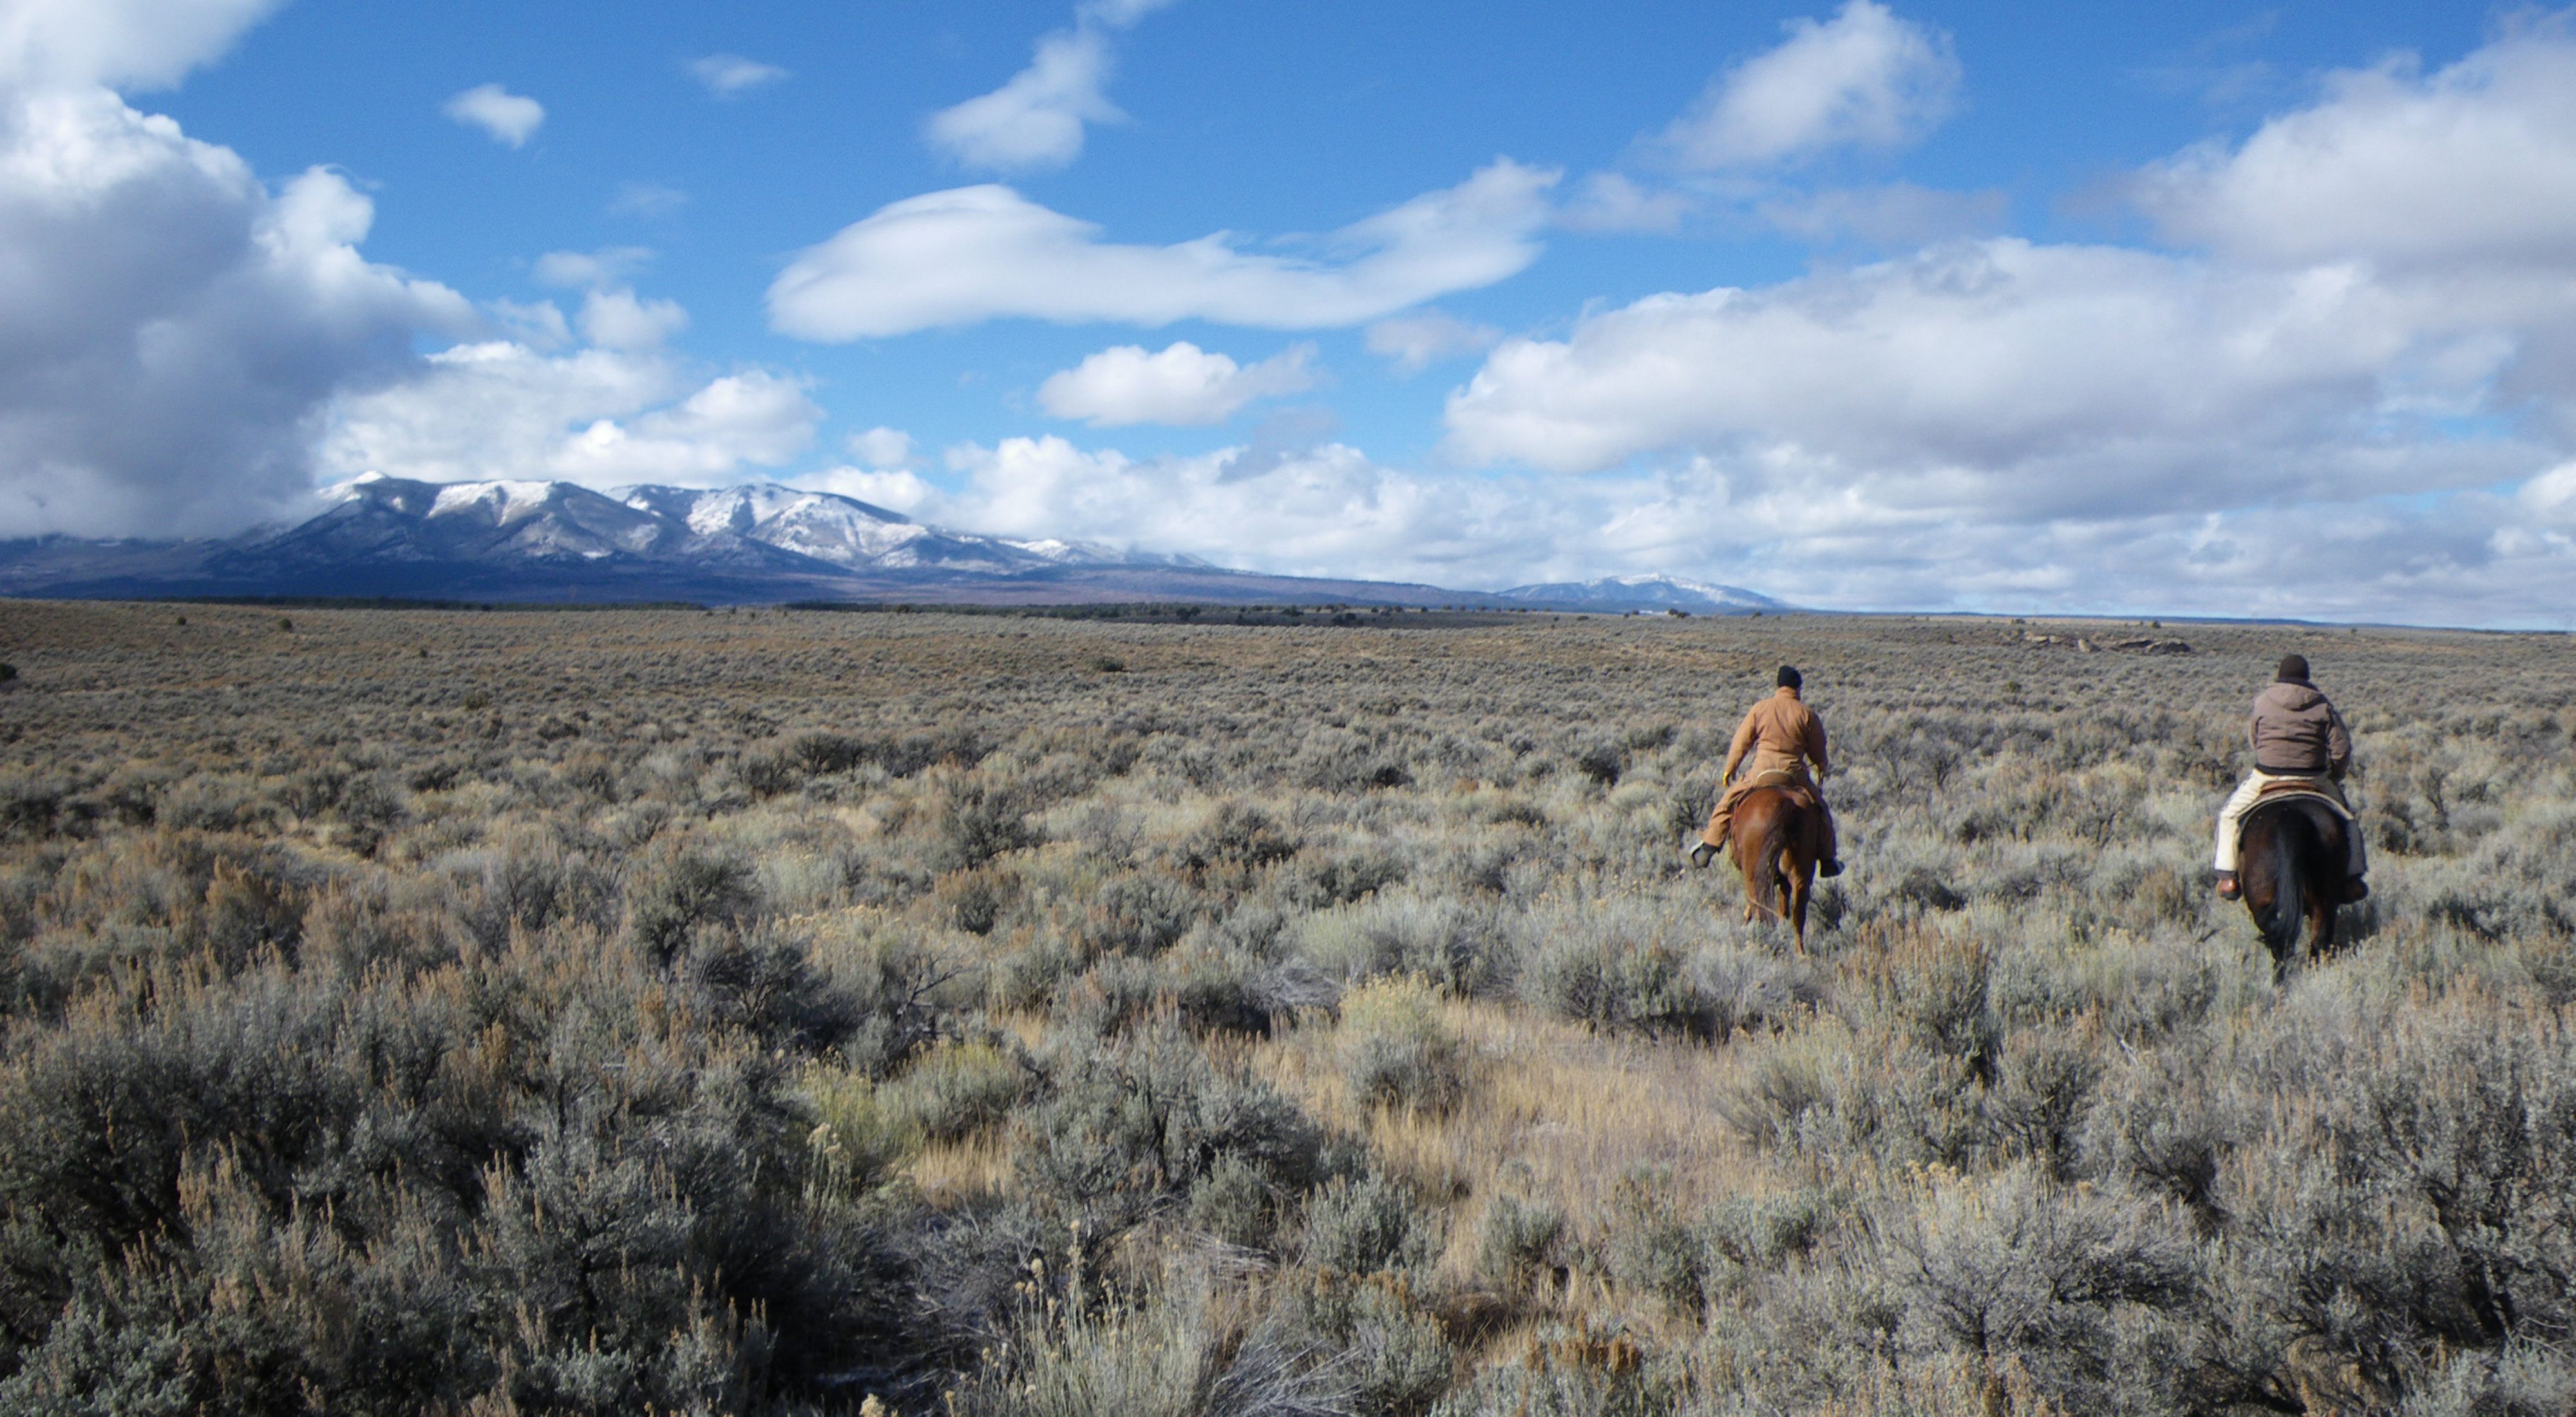 View of protected critical habitat for the Gunnison sage-grouse.